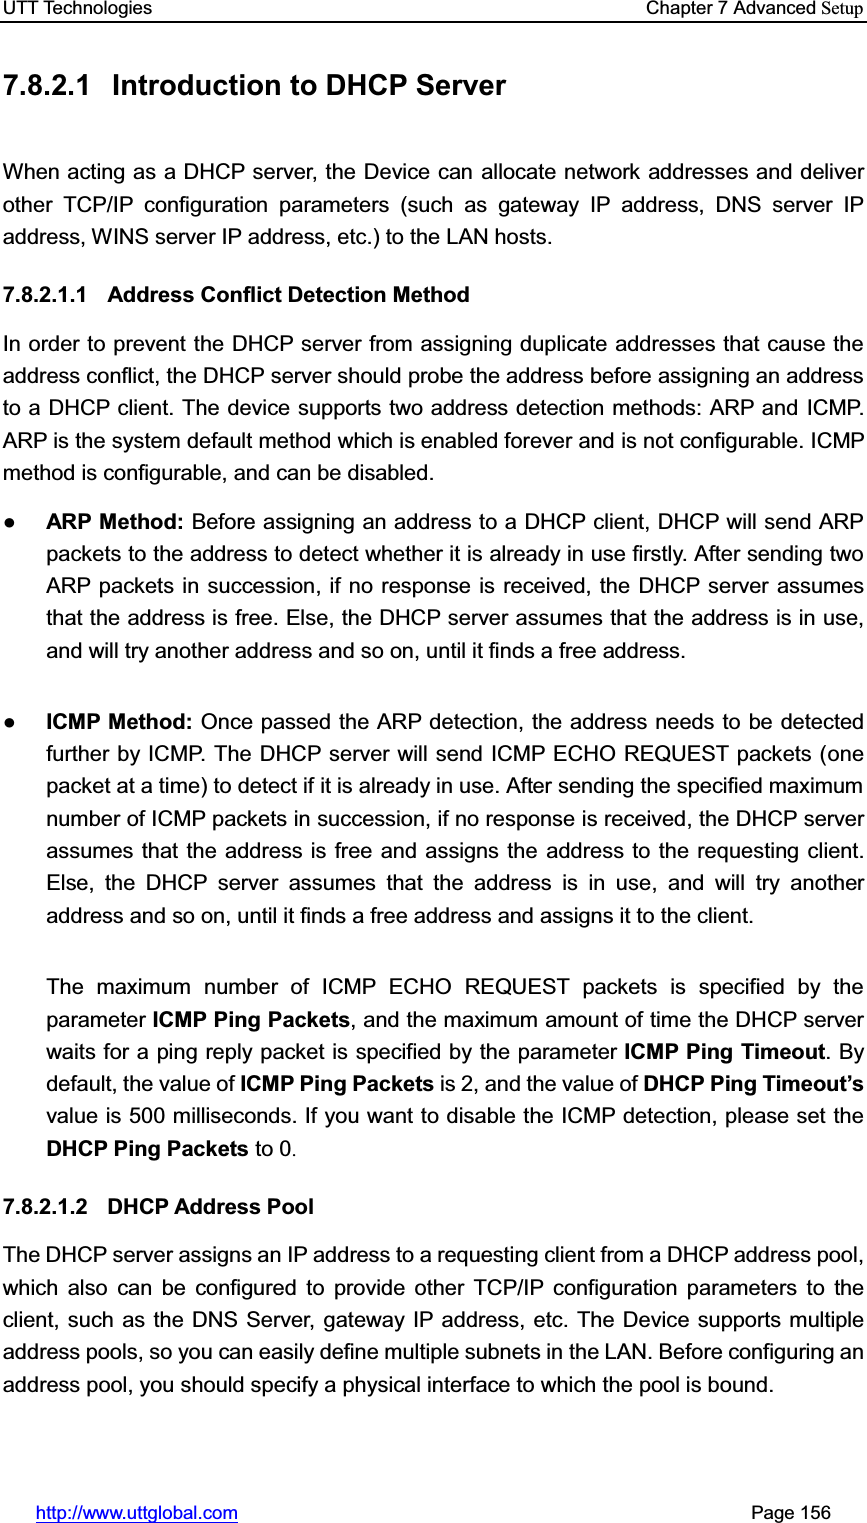 UTT Technologies    Chapter 7 Advanced Setuphttp://www.uttglobal.com                                                       Page 156 7.8.2.1  Introduction to DHCP Server   When acting as a DHCP server, the Device can allocate network addresses and deliver other TCP/IP configuration parameters (such as gateway IP address, DNS server IP address, WINS server IP address, etc.) to the LAN hosts. 7.8.2.1.1 Address Conflict Detection Method In order to prevent the DHCP server from assigning duplicate addresses that cause the address conflict, the DHCP server should probe the address before assigning an address to a DHCP client. The device supports two address detection methods: ARP and ICMP. ARP is the system default method which is enabled forever and is not configurable. ICMP method is configurable, and can be disabled. ƔARP Method: Before assigning an address to a DHCP client, DHCP will send ARP packets to the address to detect whether it is already in use firstly. After sending two ARP packets in succession, if no response is received, the DHCP server assumes that the address is free. Else, the DHCP server assumes that the address is in use, and will try another address and so on, until it finds a free address. ƔICMP Method: Once passed the ARP detection, the address needs to be detected further by ICMP. The DHCP server will send ICMP ECHO REQUEST packets (one packet at a time) to detect if it is already in use. After sending the specified maximum number of ICMP packets in succession, if no response is received, the DHCP server assumes that the address is free and assigns the address to the requesting client. Else, the DHCP server assumes that the address is in use, and will try another address and so on, until it finds a free address and assigns it to the client. The maximum number of ICMP ECHO REQUEST packets is specified by the parameter ICMP Ping Packets, and the maximum amount of time the DHCP server waits for a ping reply packet is specified by the parameter ICMP Ping Timeout. By default, the value of ICMP Ping Packets is 2, and the value of DHCP Ping Timeout¶svalue is 500 milliseconds. If you want to disable the ICMP detection, please set the DHCP Ping Packets to 0.7.8.2.1.2 DHCP Address Pool The DHCP server assigns an IP address to a requesting client from a DHCP address pool, which also can be configured to provide other TCP/IP configuration parameters to the client, such as the DNS Server, gateway IP address, etc. The Device supports multiple address pools, so you can easily define multiple subnets in the LAN. Before configuring an address pool, you should specify a physical interface to which the pool is bound. 